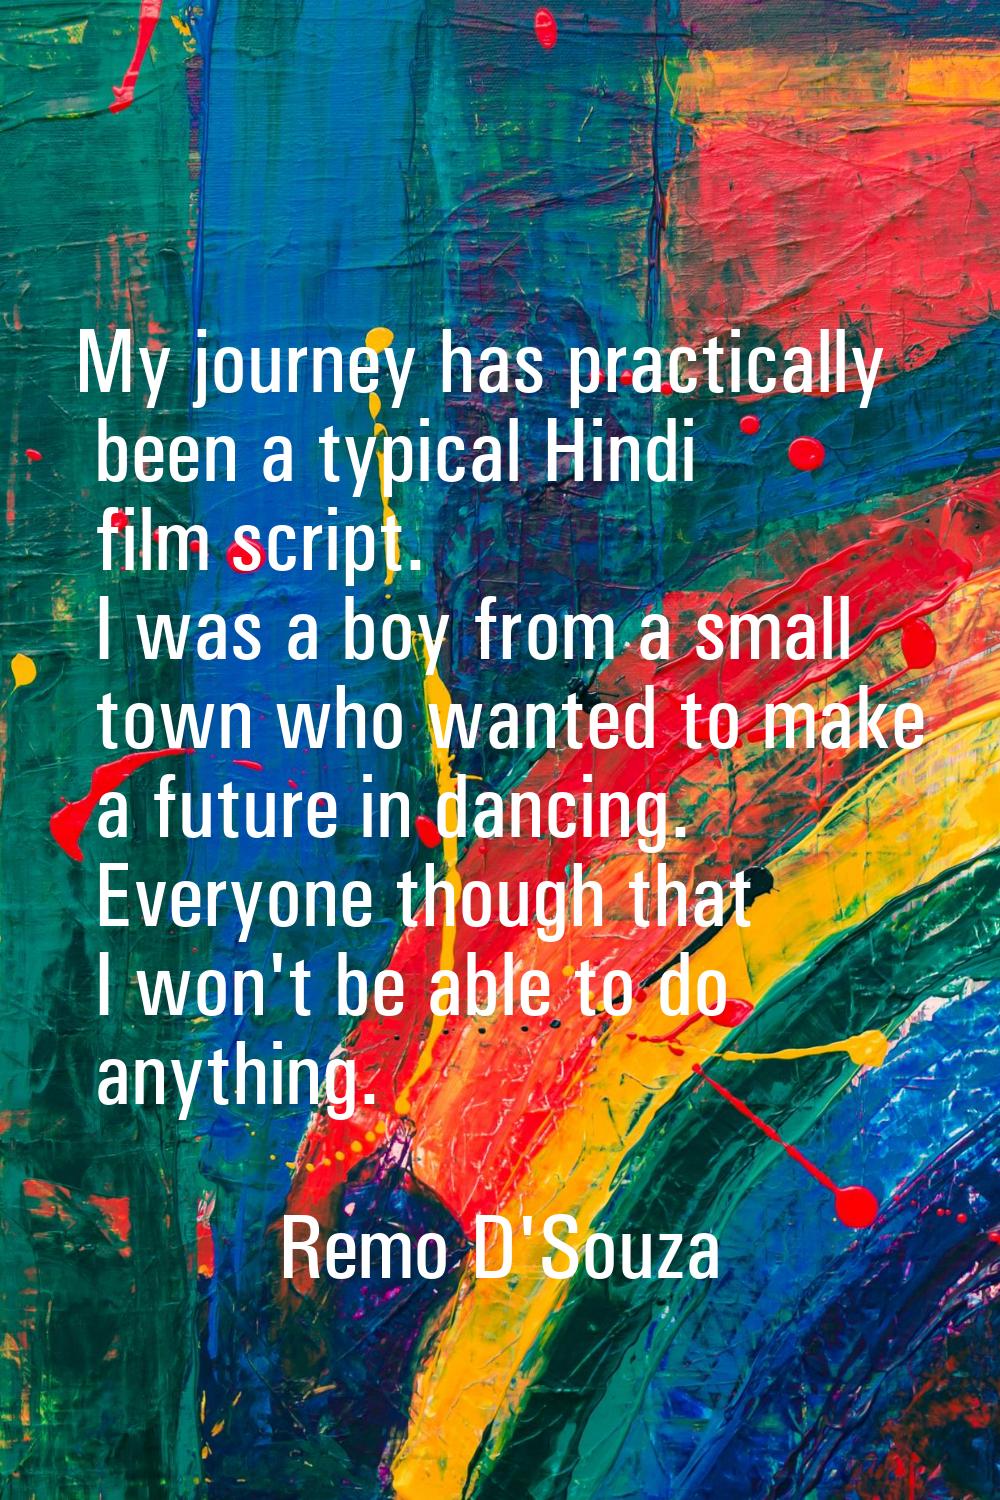 My journey has practically been a typical Hindi film script. I was a boy from a small town who want